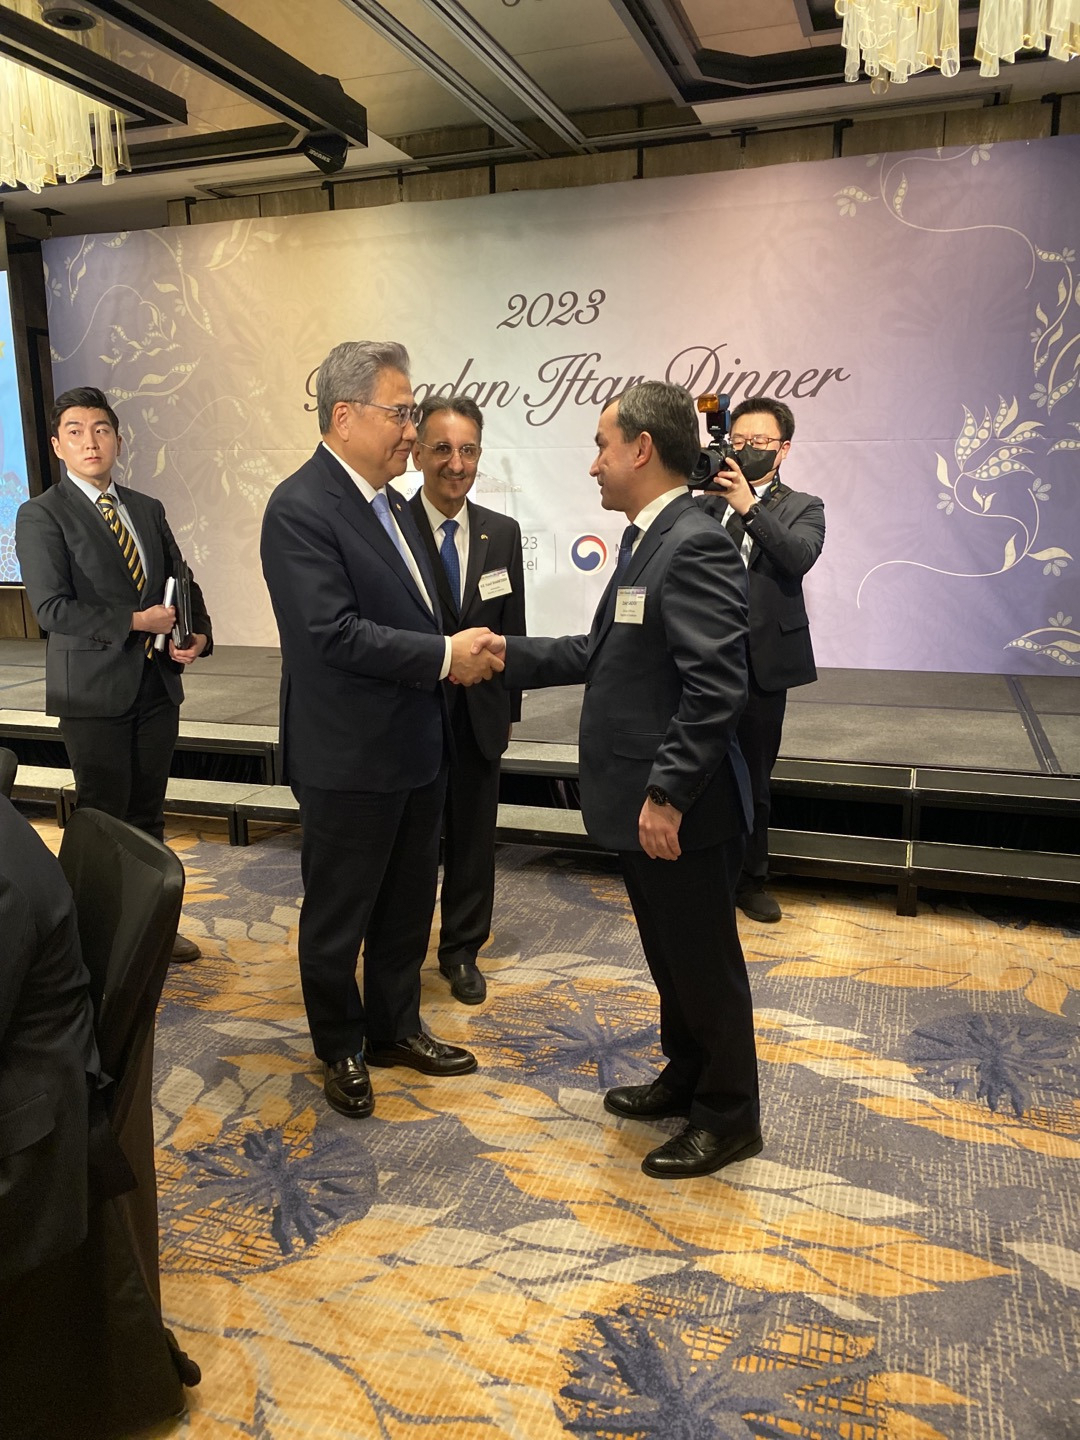 South Korean Minister of Foreign Affairs Park Jin exchanged greetings with Uzbek Embassy Charge d'Affaires a.i Zokir Saidov at an Iftar dinner commemorating the Islamic holy month of Ramadan at the Four Seasons Hotel in Jung-gu, Seoul, Friday. (Sanjay Kumar/The Korea Herald)